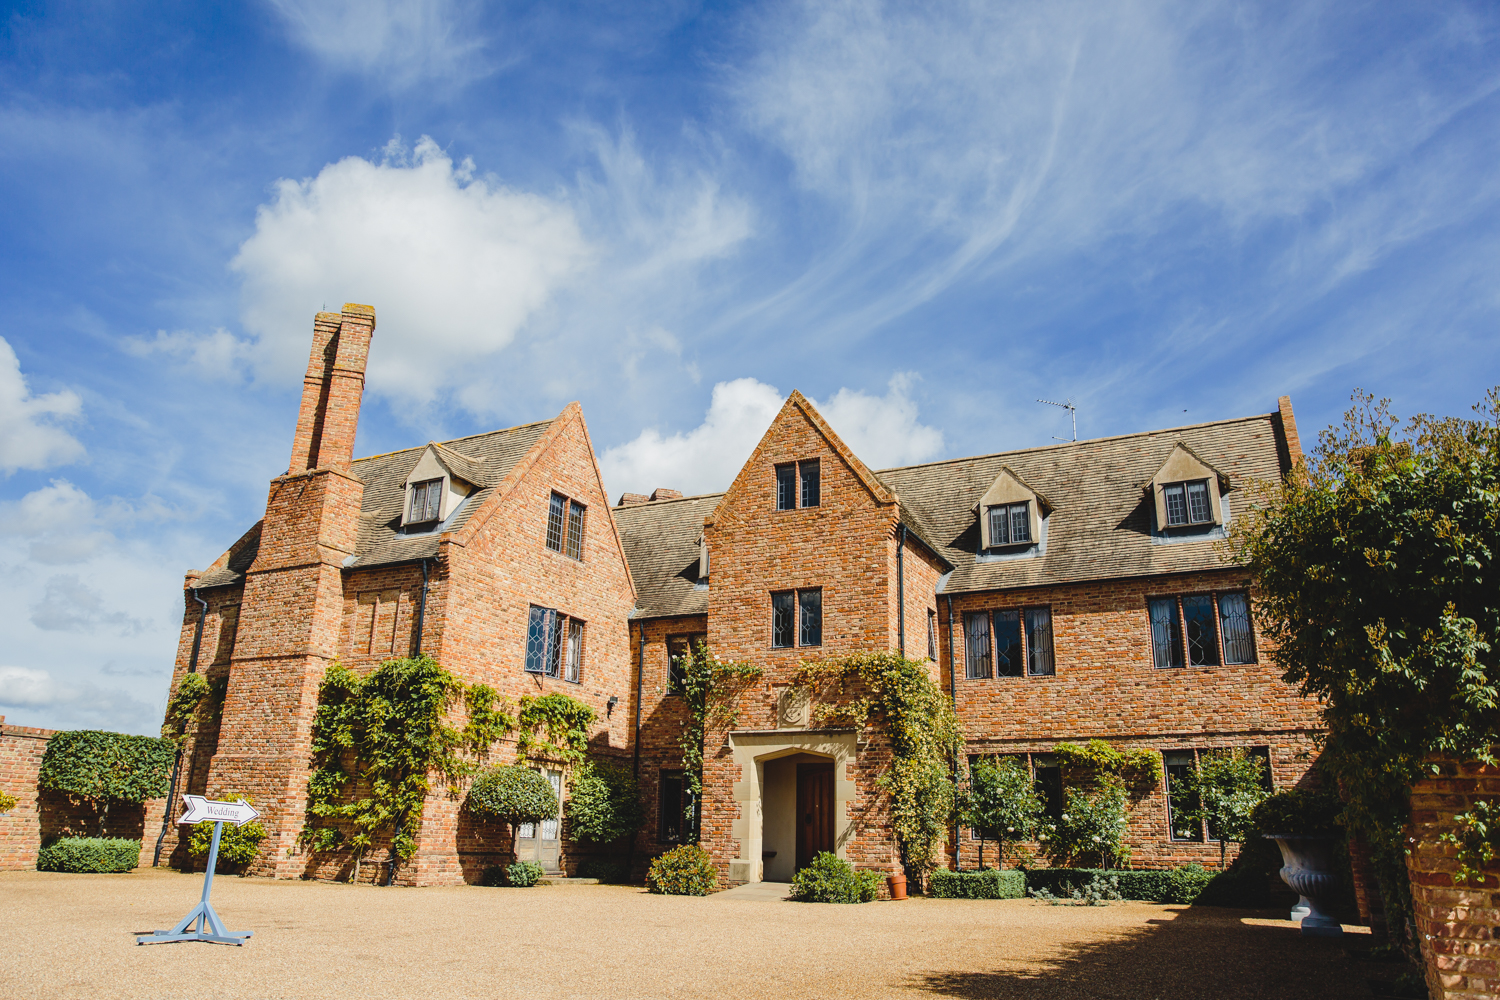 The Old Hall, Ely. Photos by Ely Wedding Photographer